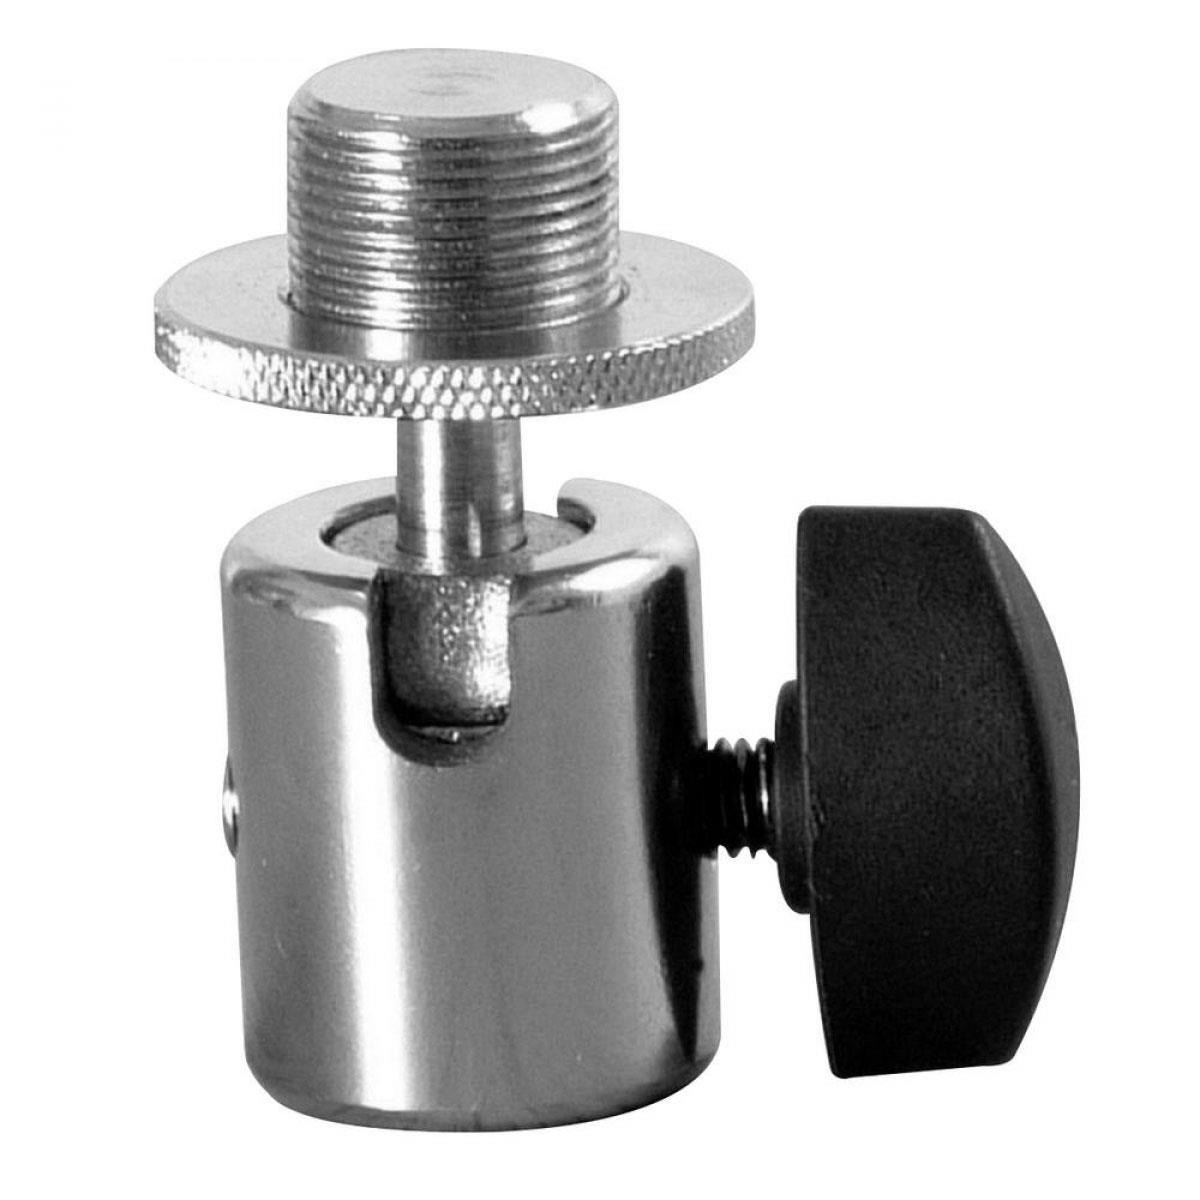 Image of On-Stage Ball-Joint Mic Adapter